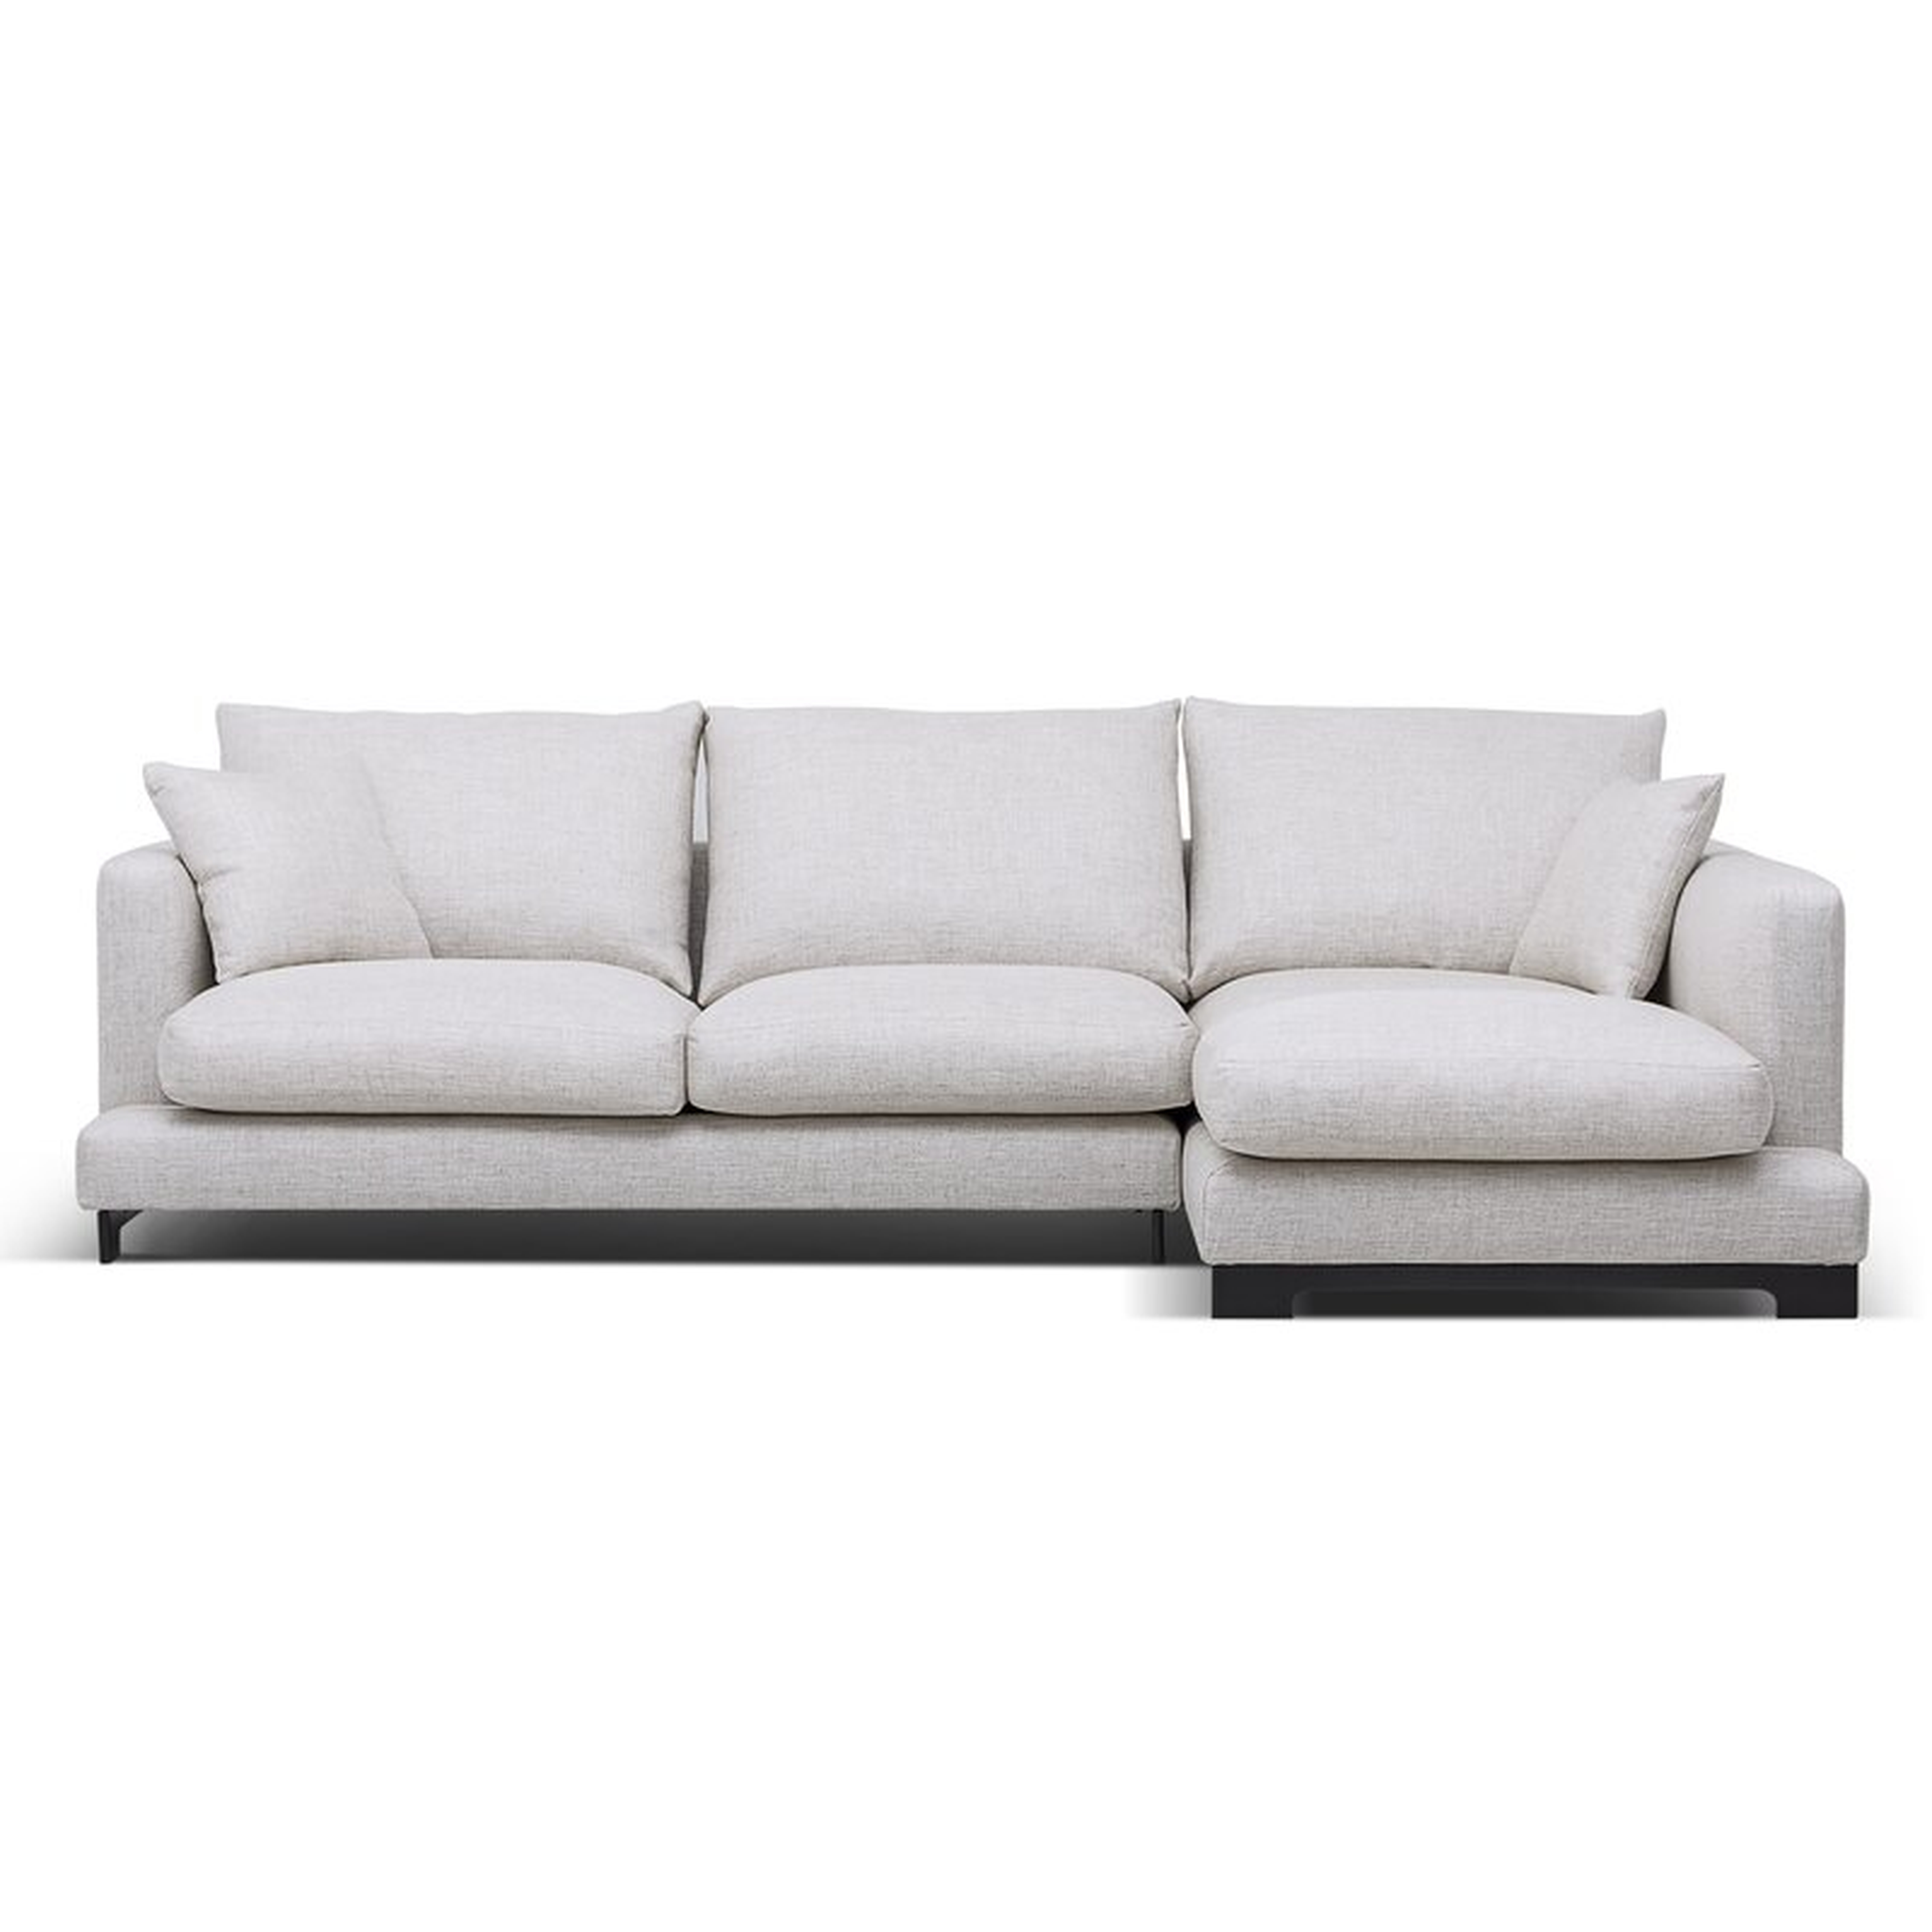 Camerich Lazy Time Sectional Fabric: White, Orientation: Right Hand Facing - Perigold